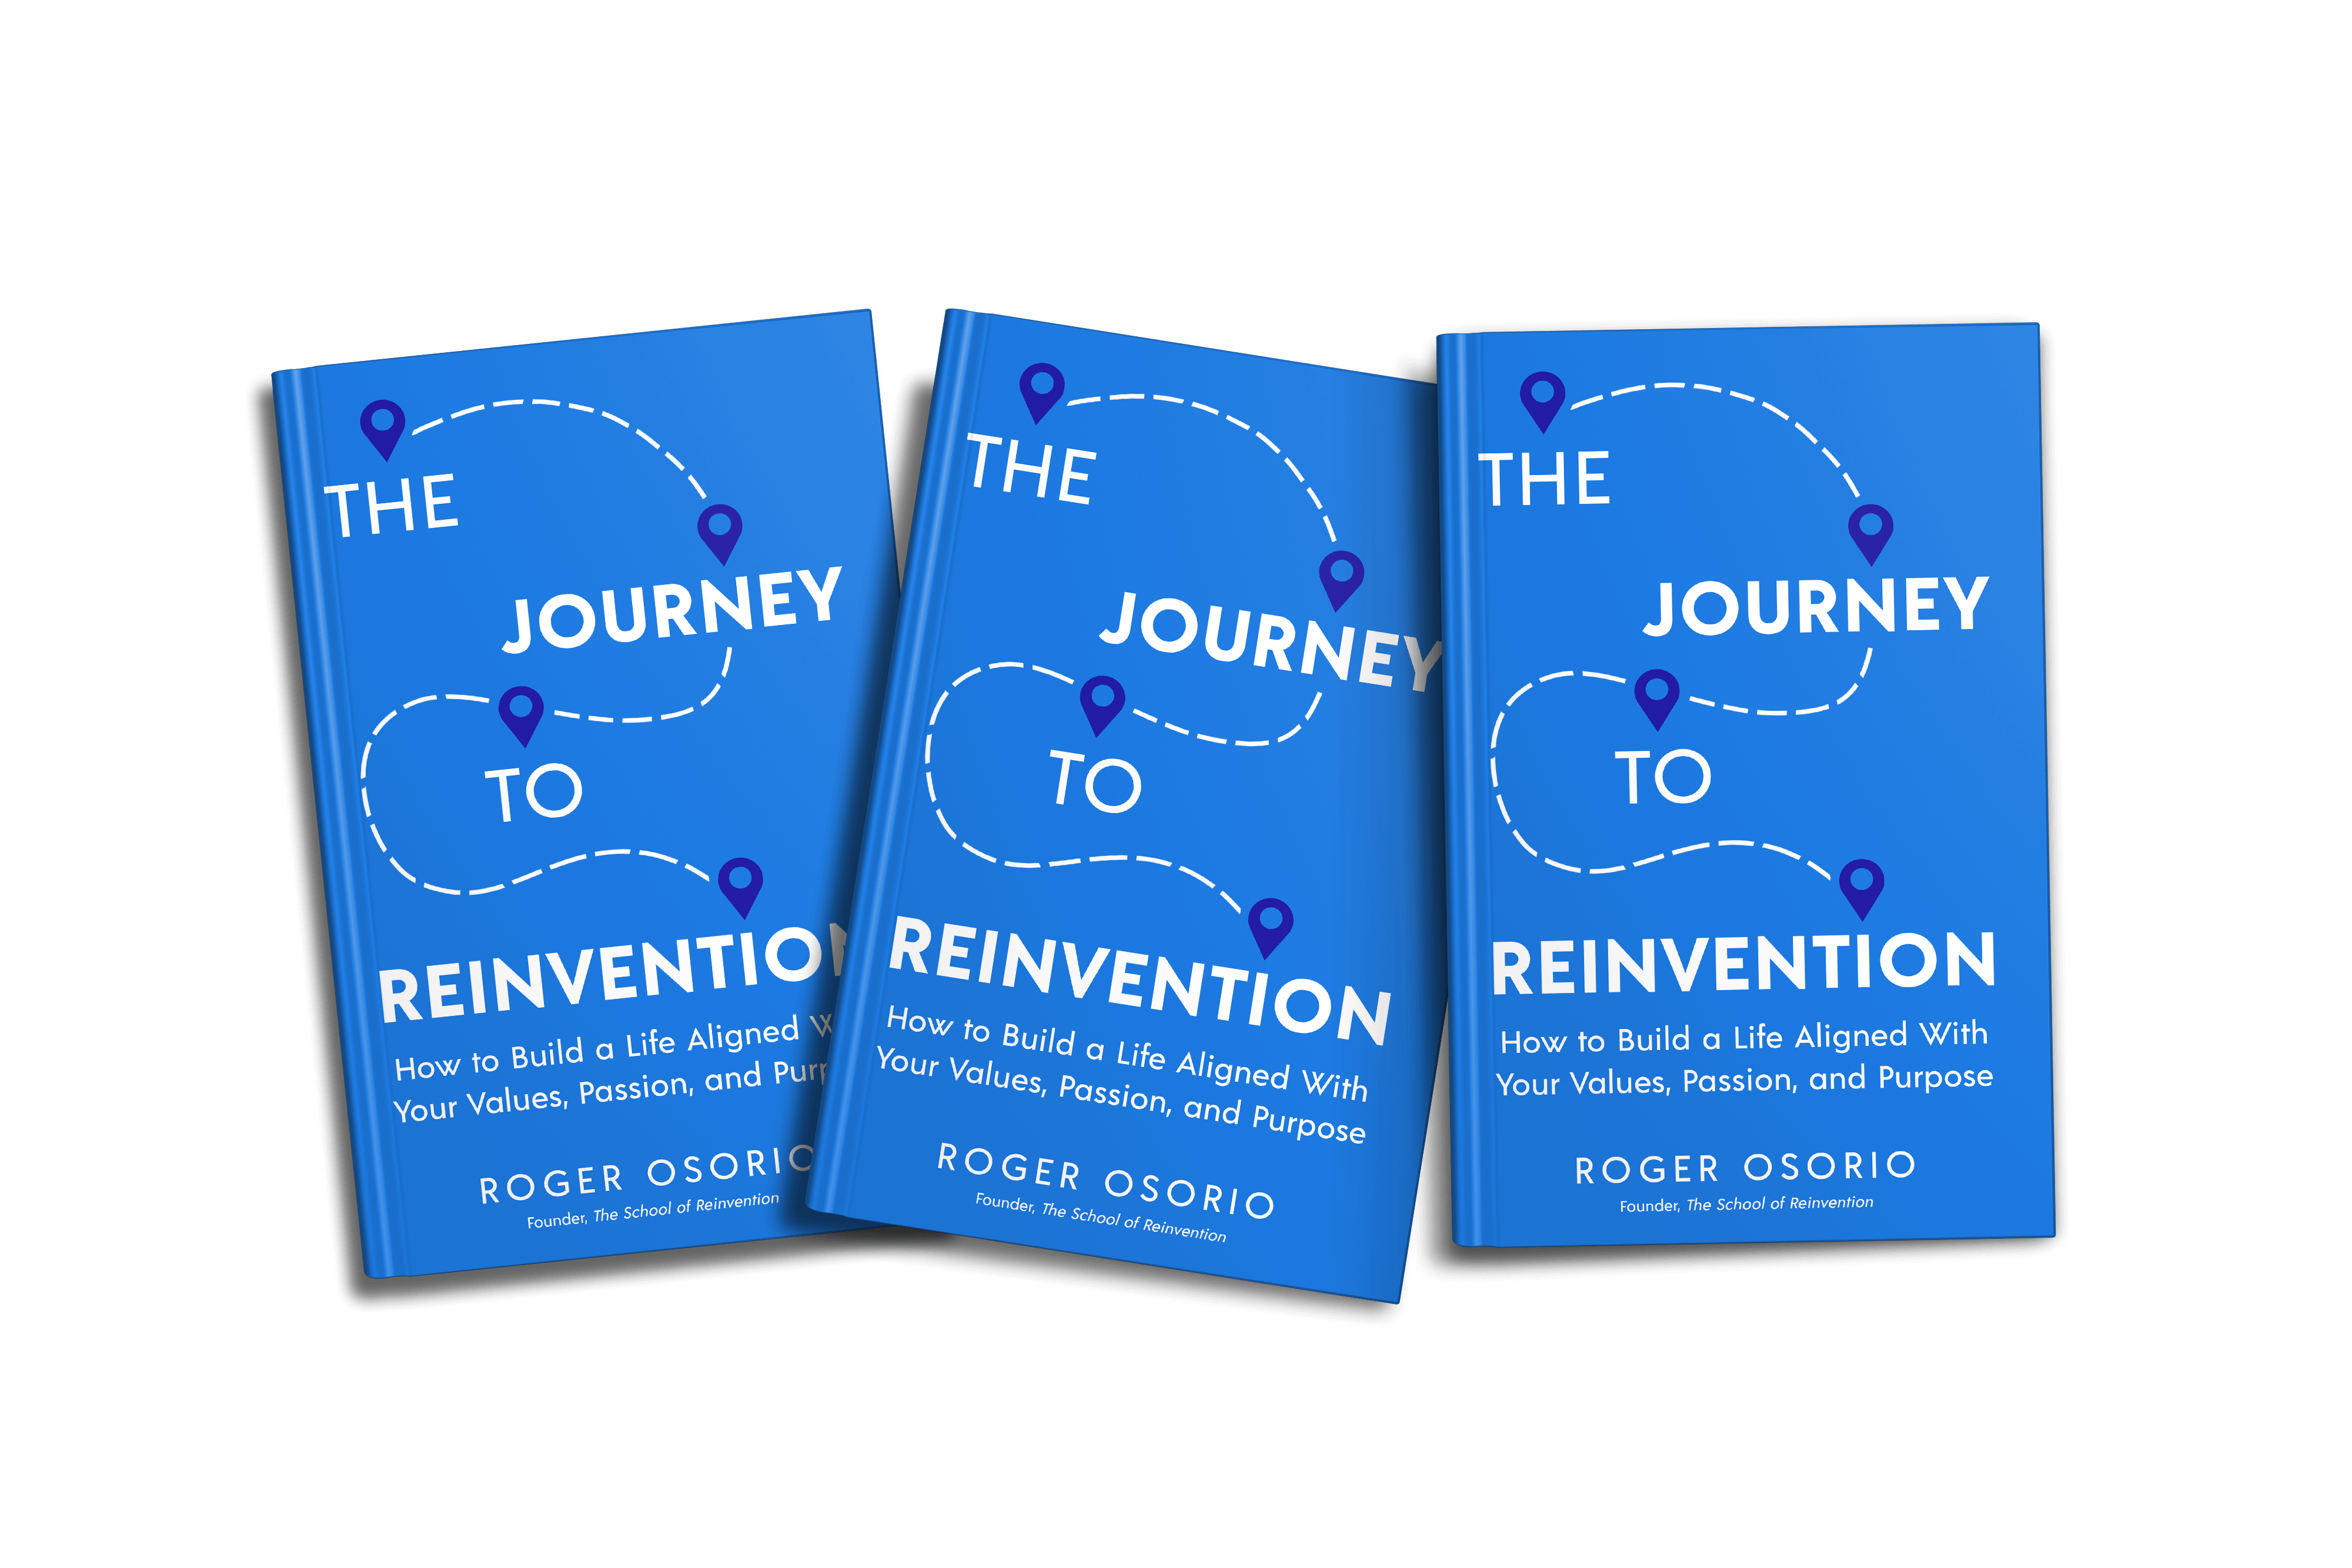 The Journey to Reinvention Book covers x3